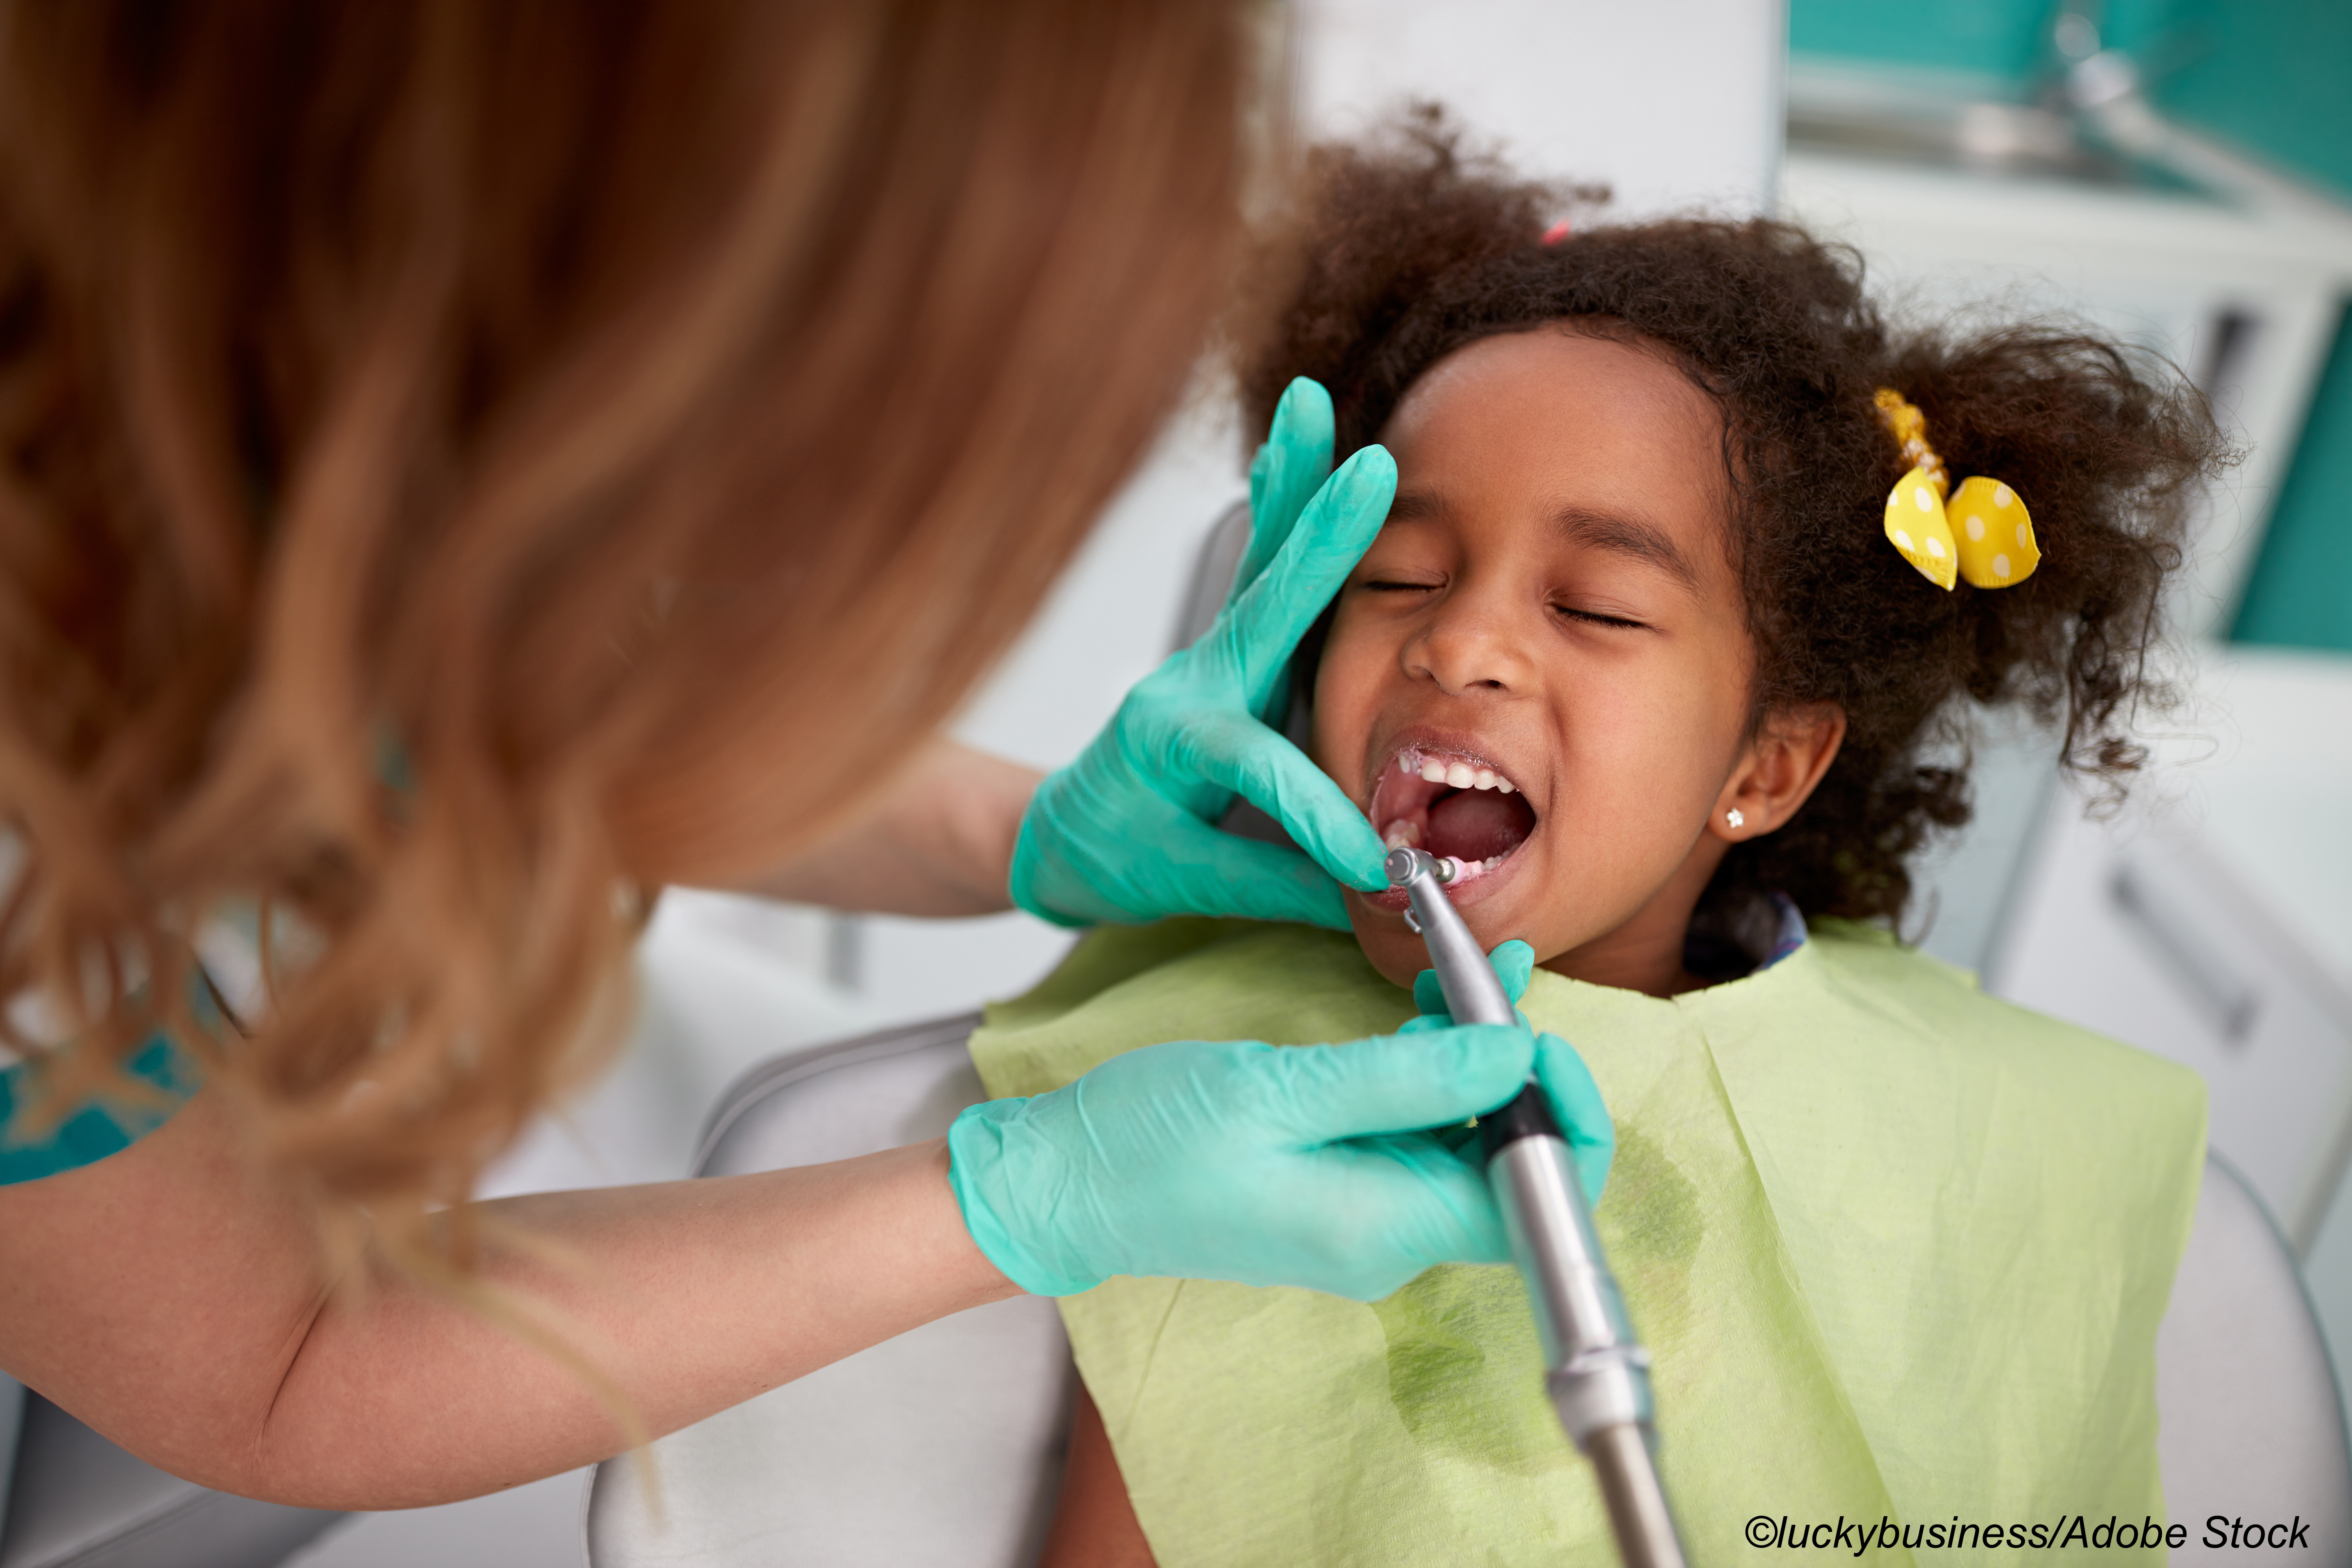 USPSTF Smiles on Fluoride Treatment for Young Children
